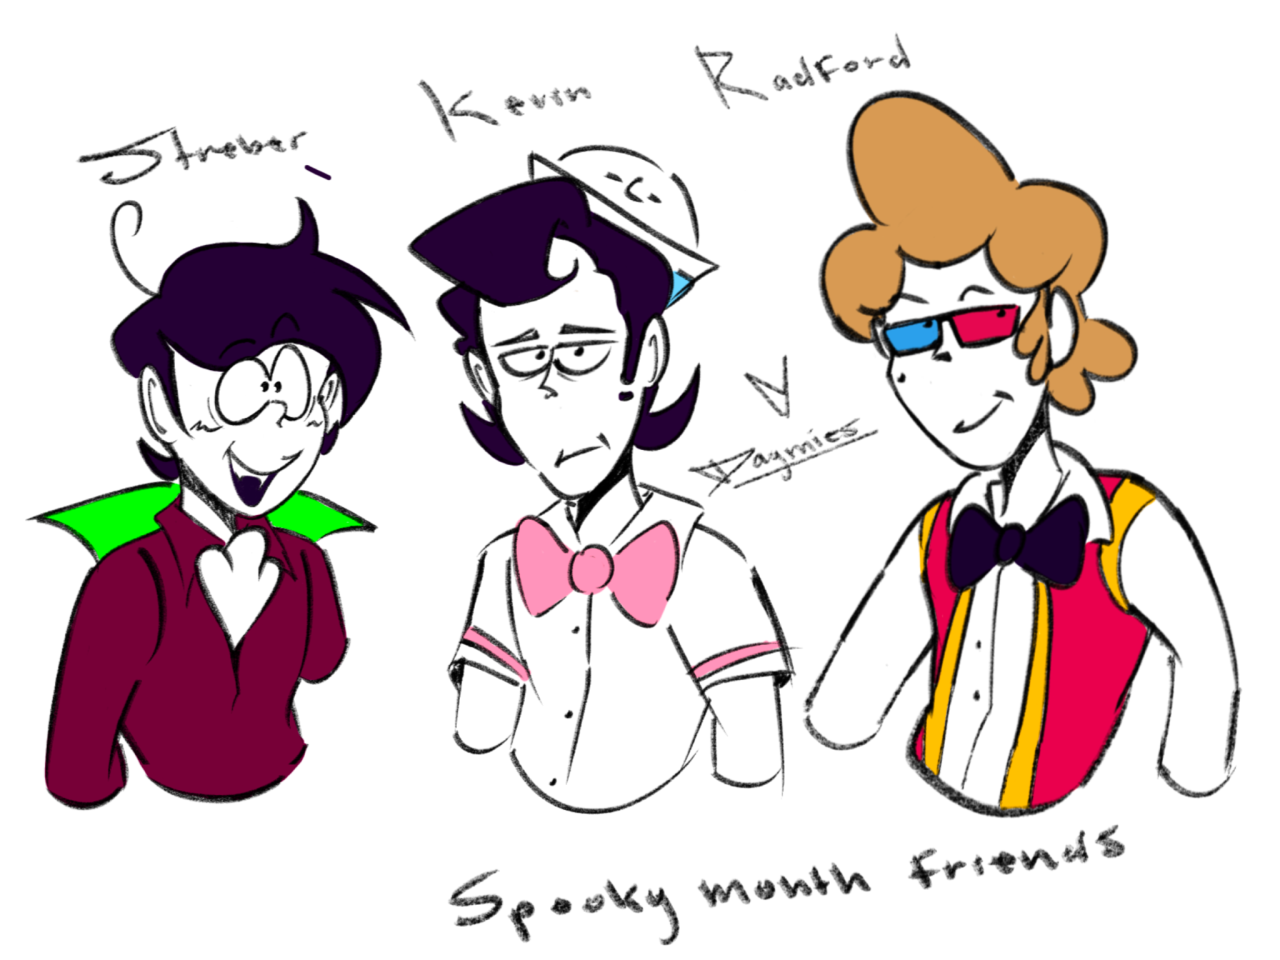 Kevin throught each episode(by Sr.Pelo himself) : r/spookymonth